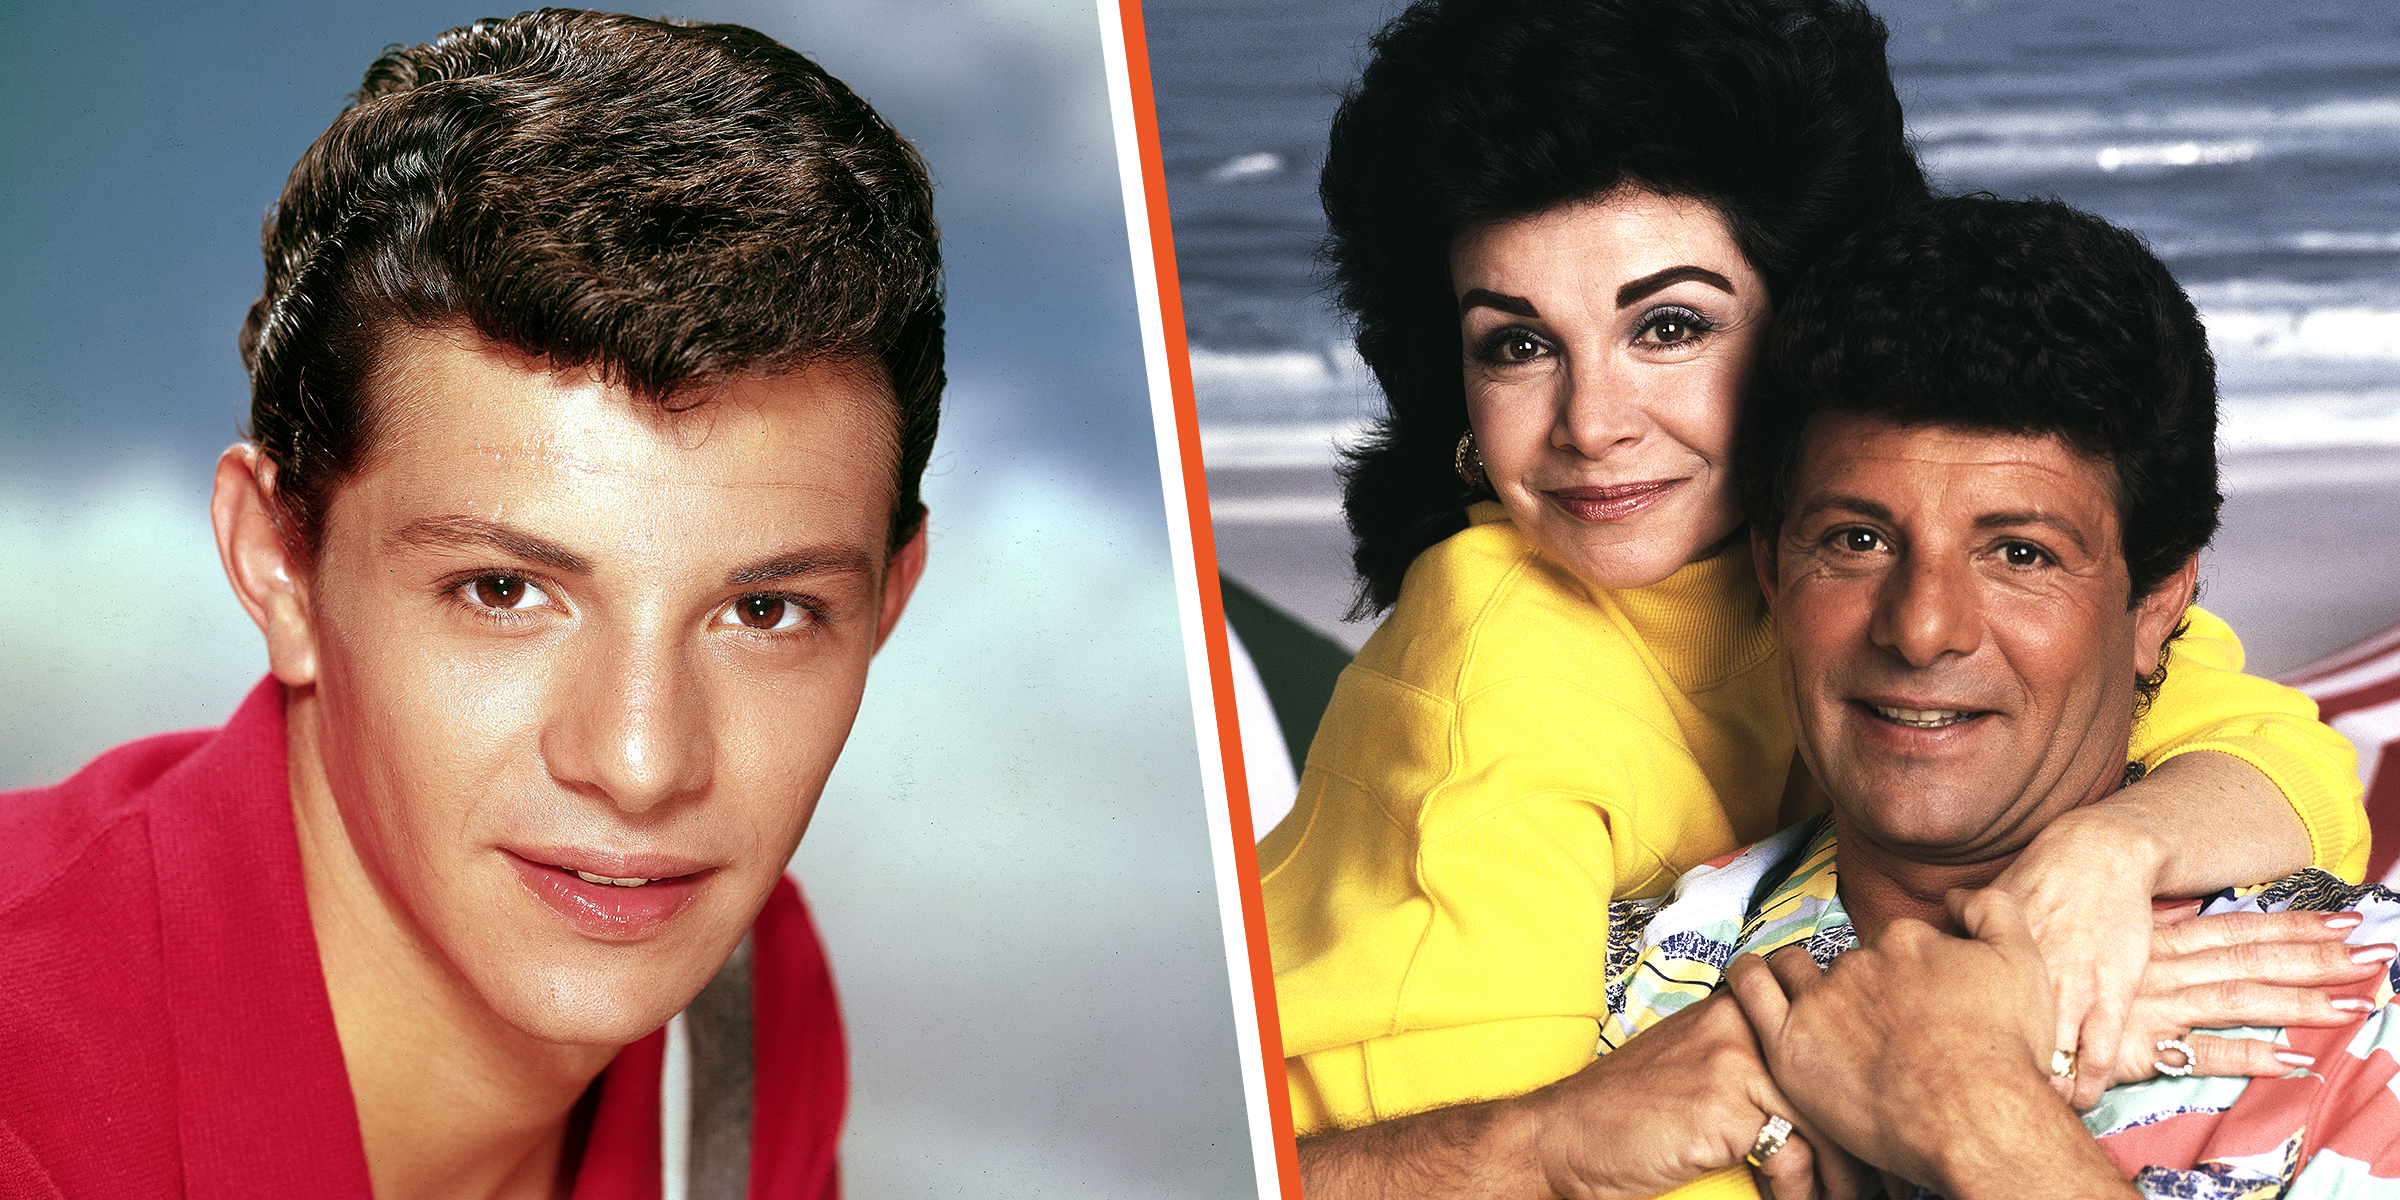 Frankie Avalon and Annette Funicello | Source: Getty Images